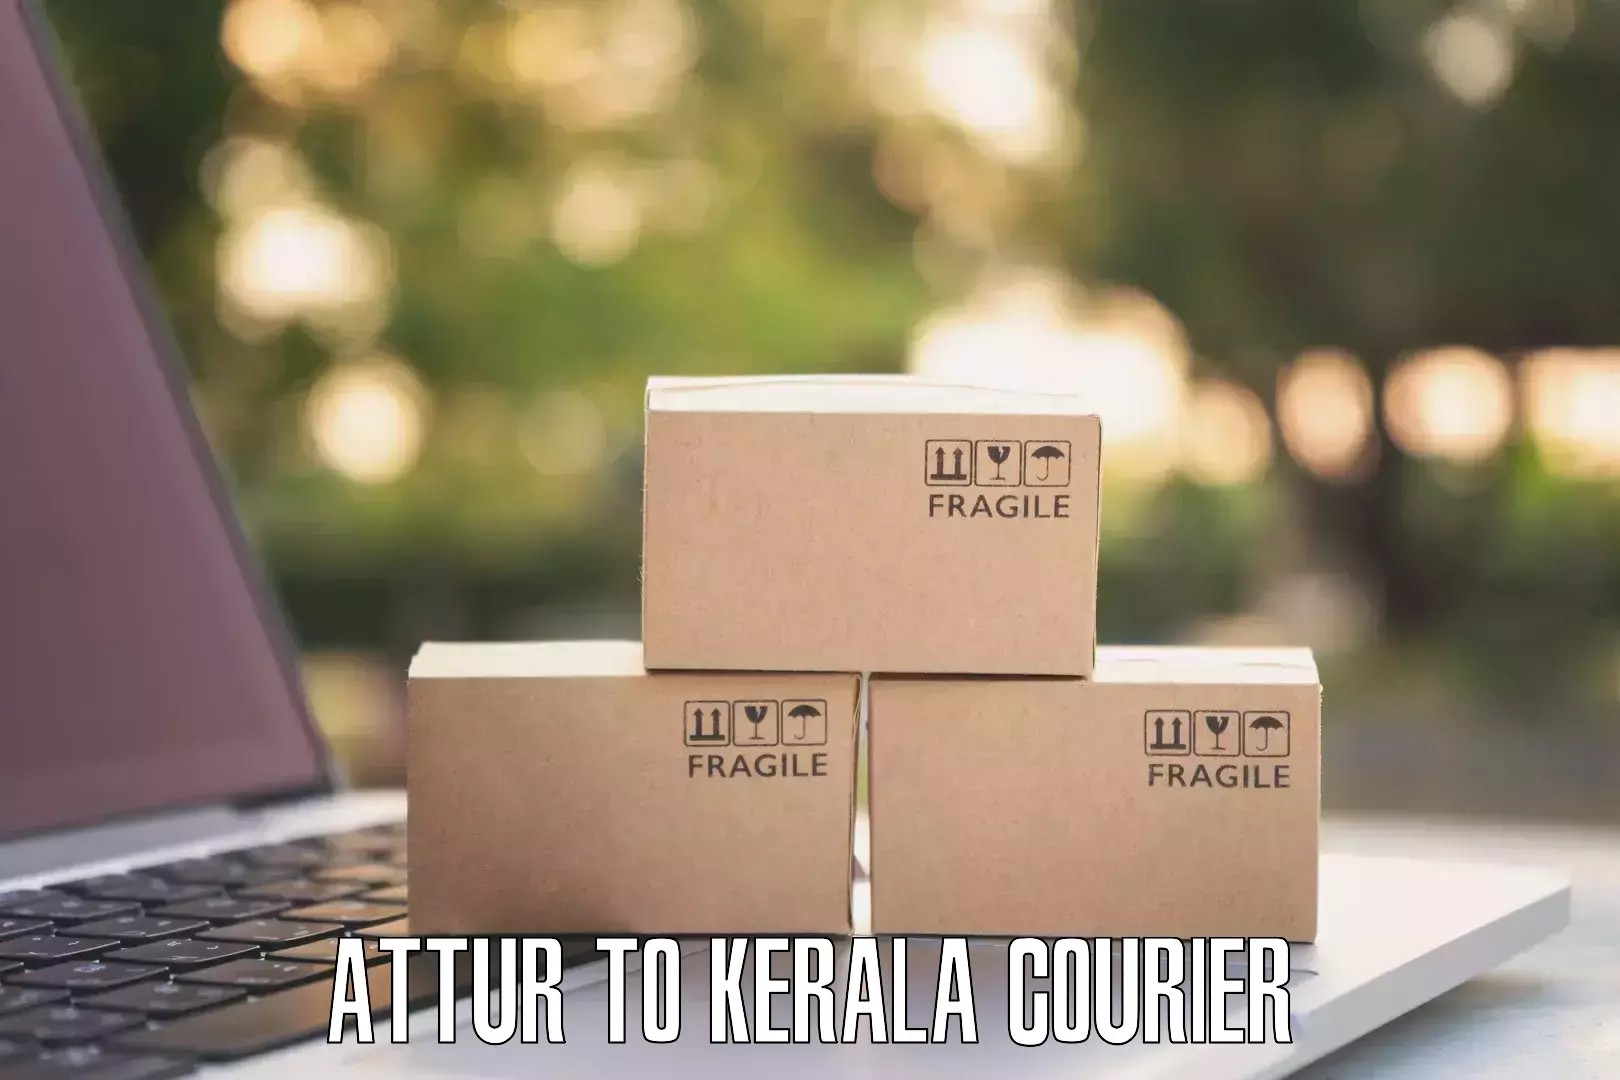 Same-day delivery options Attur to Palai